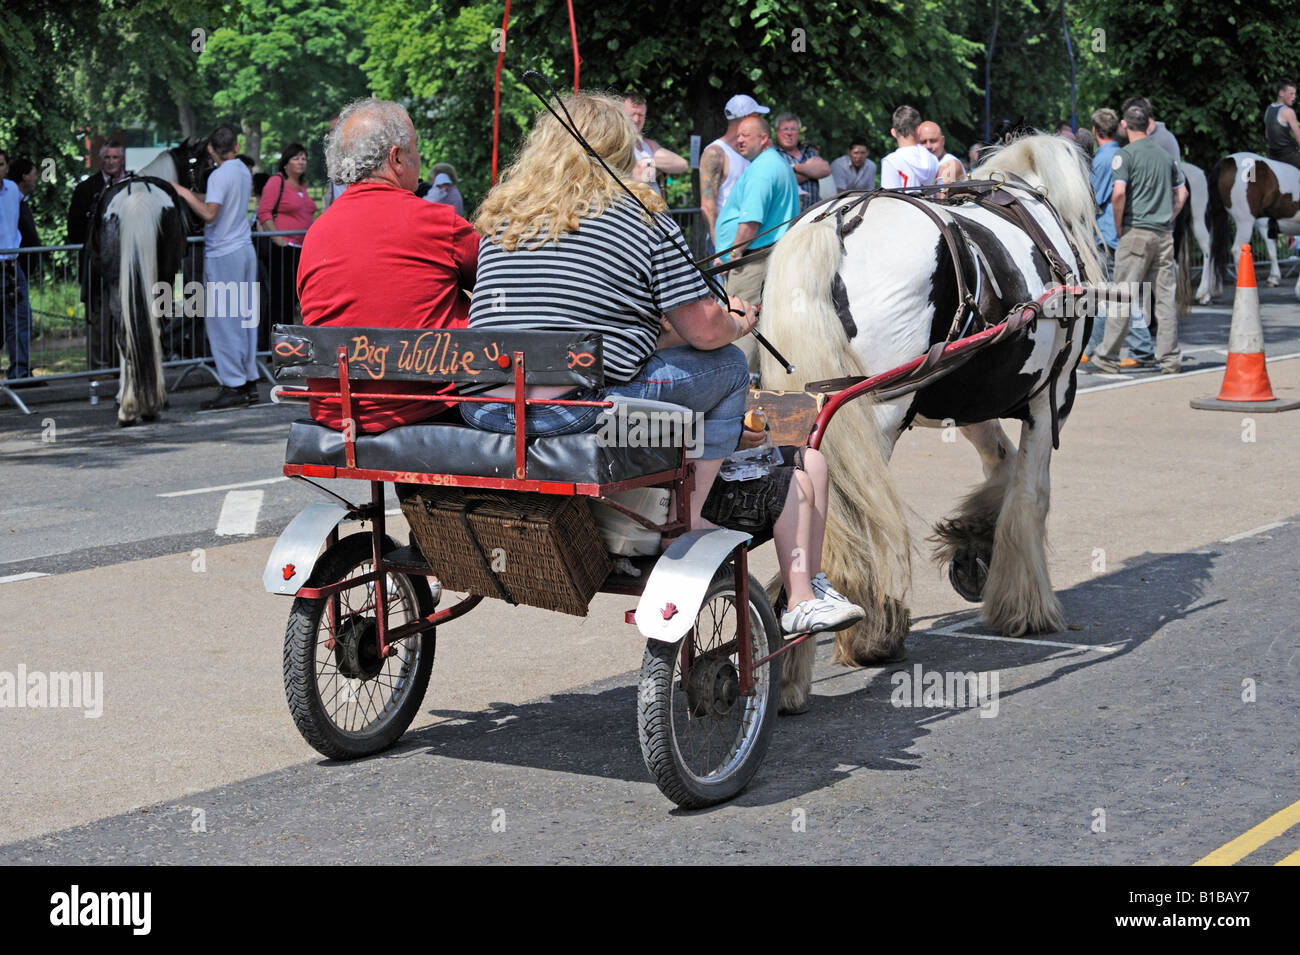 'Big Wullie', gypsy travellers driving horse and trap. Appleby Horse Fair. Appleby-in-Westmorland, Cumbria, England. Stock Photo